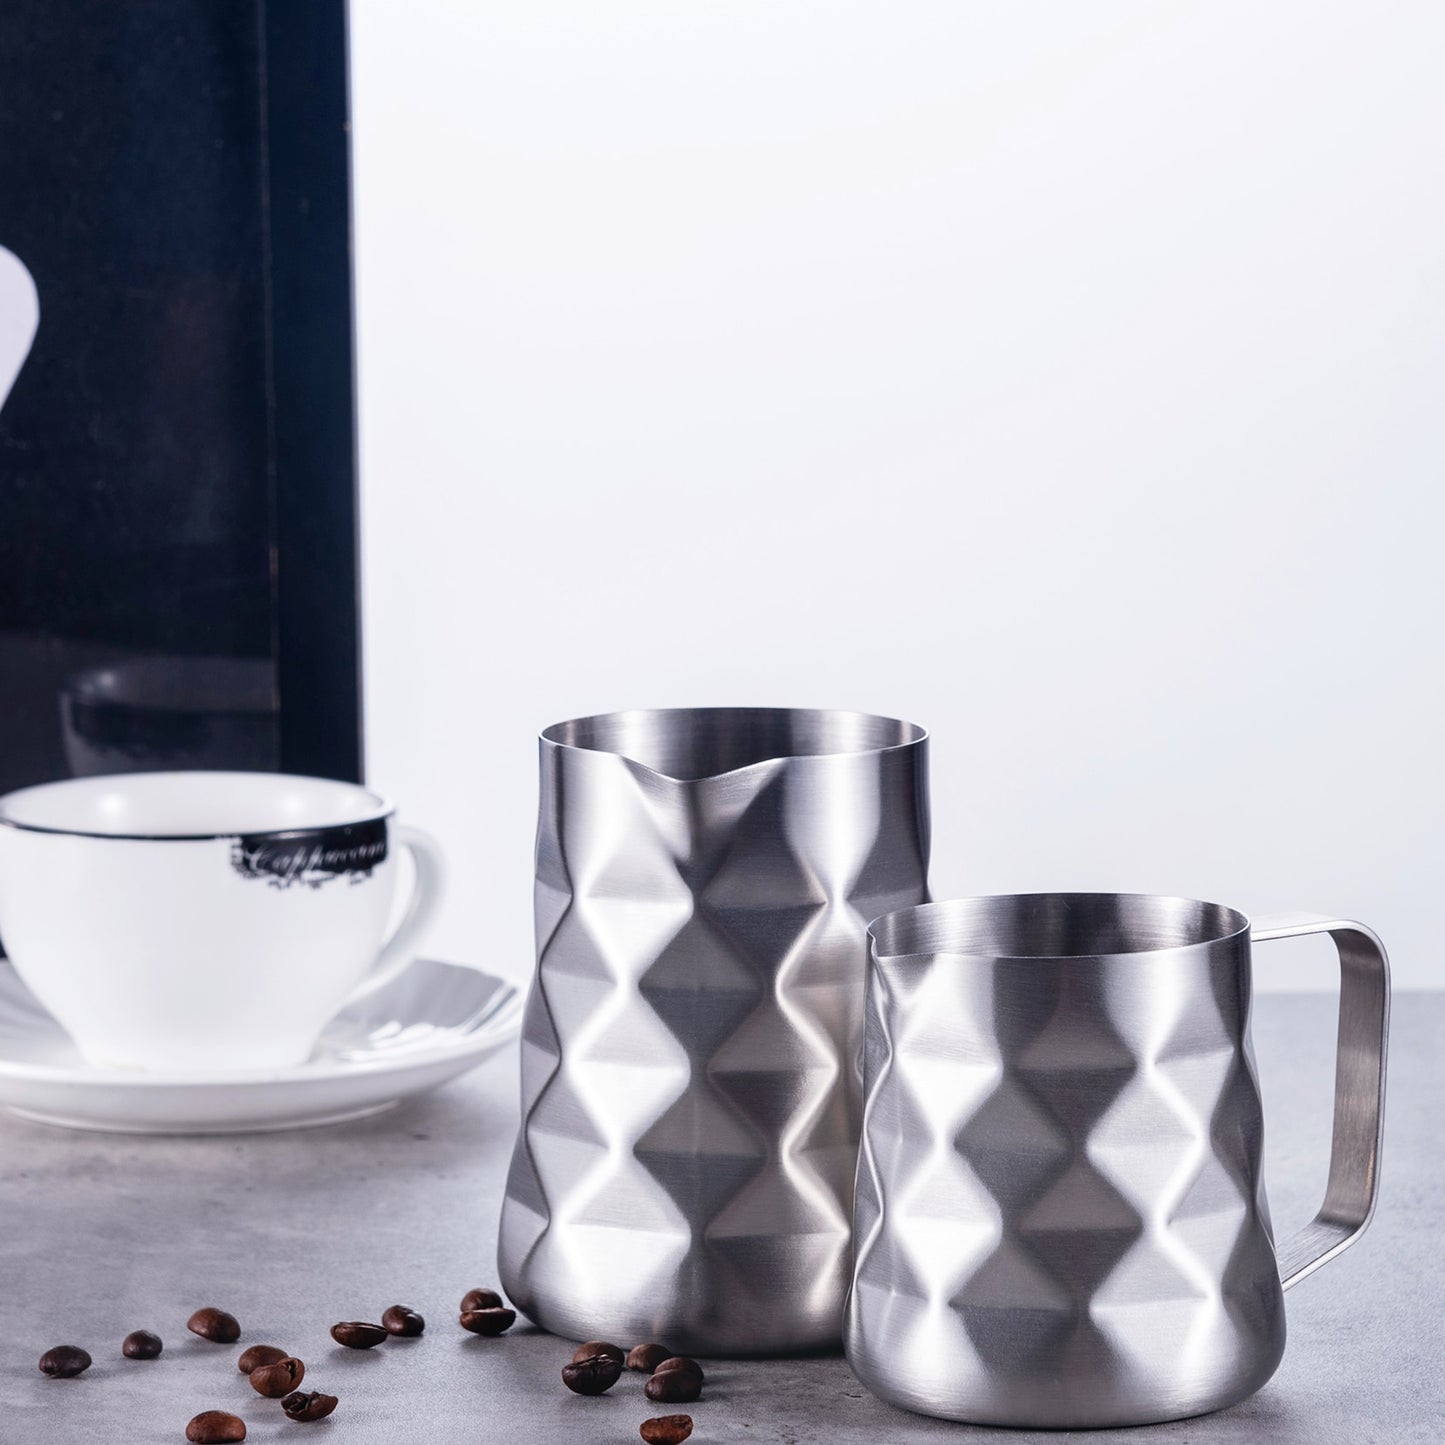 Modern Looking Kitchen Coffee Brew Gear Stainless Steel Prismatic Frothing Pitchers In 12 Ounce And 20 Ounce Sizes With Coffee Beans